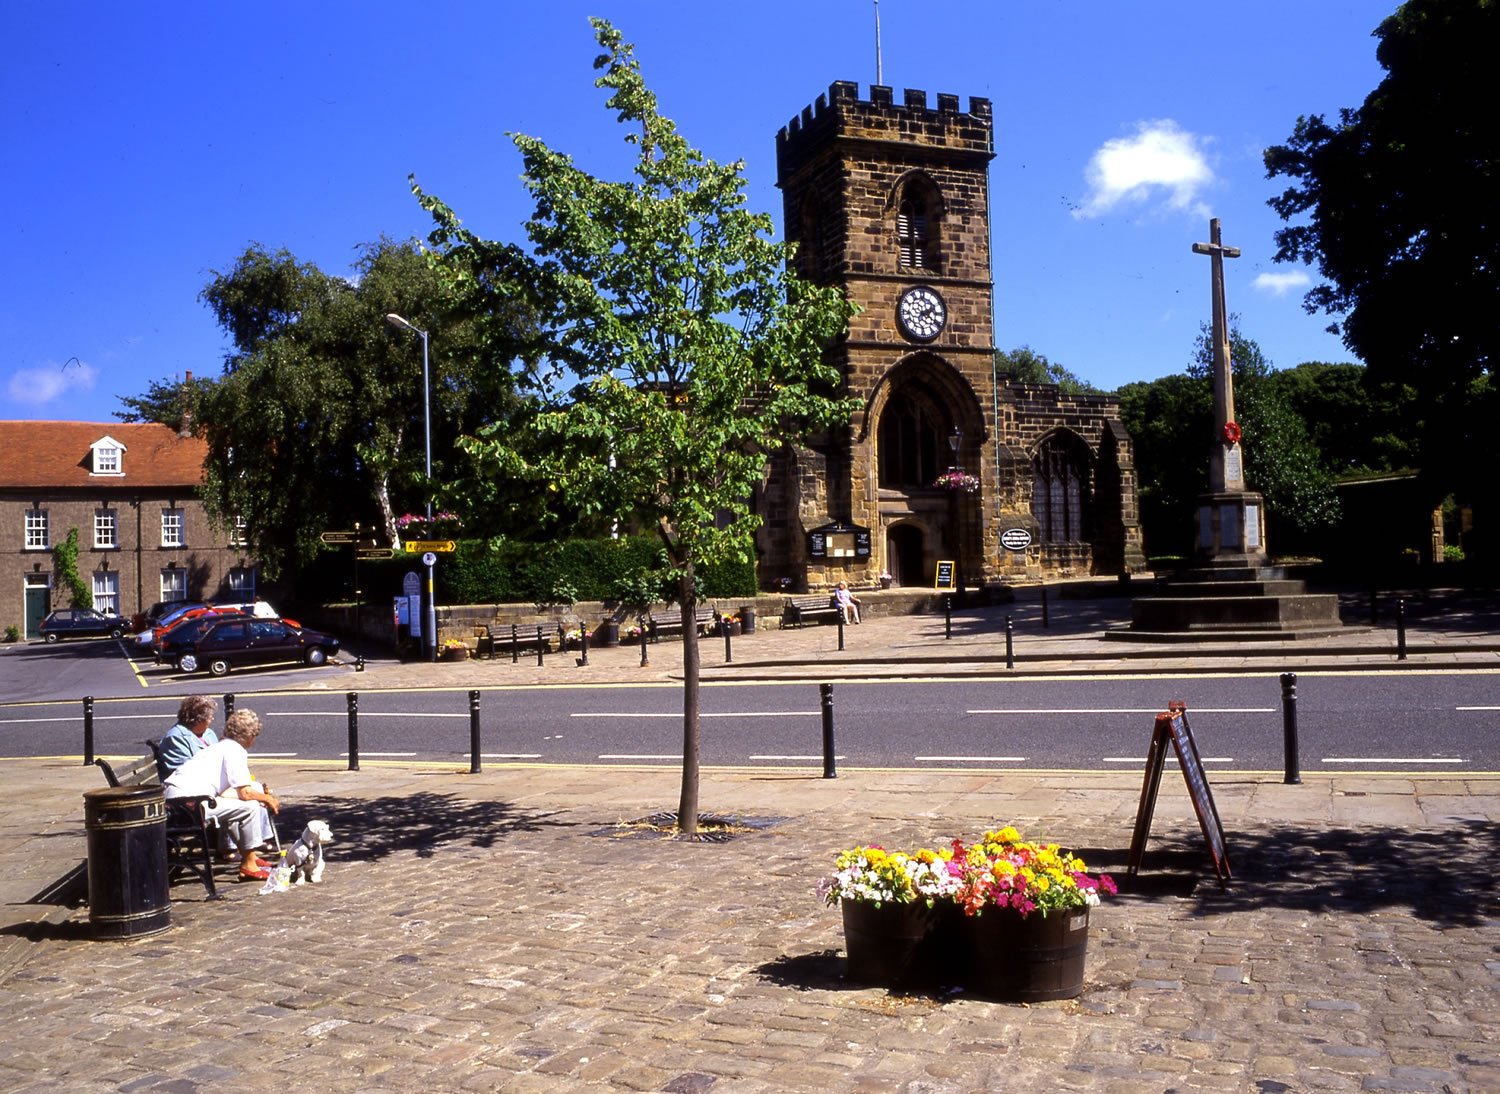 Image name guisborough church square the 1 image from the post Guisborough in Yorkshire.com.